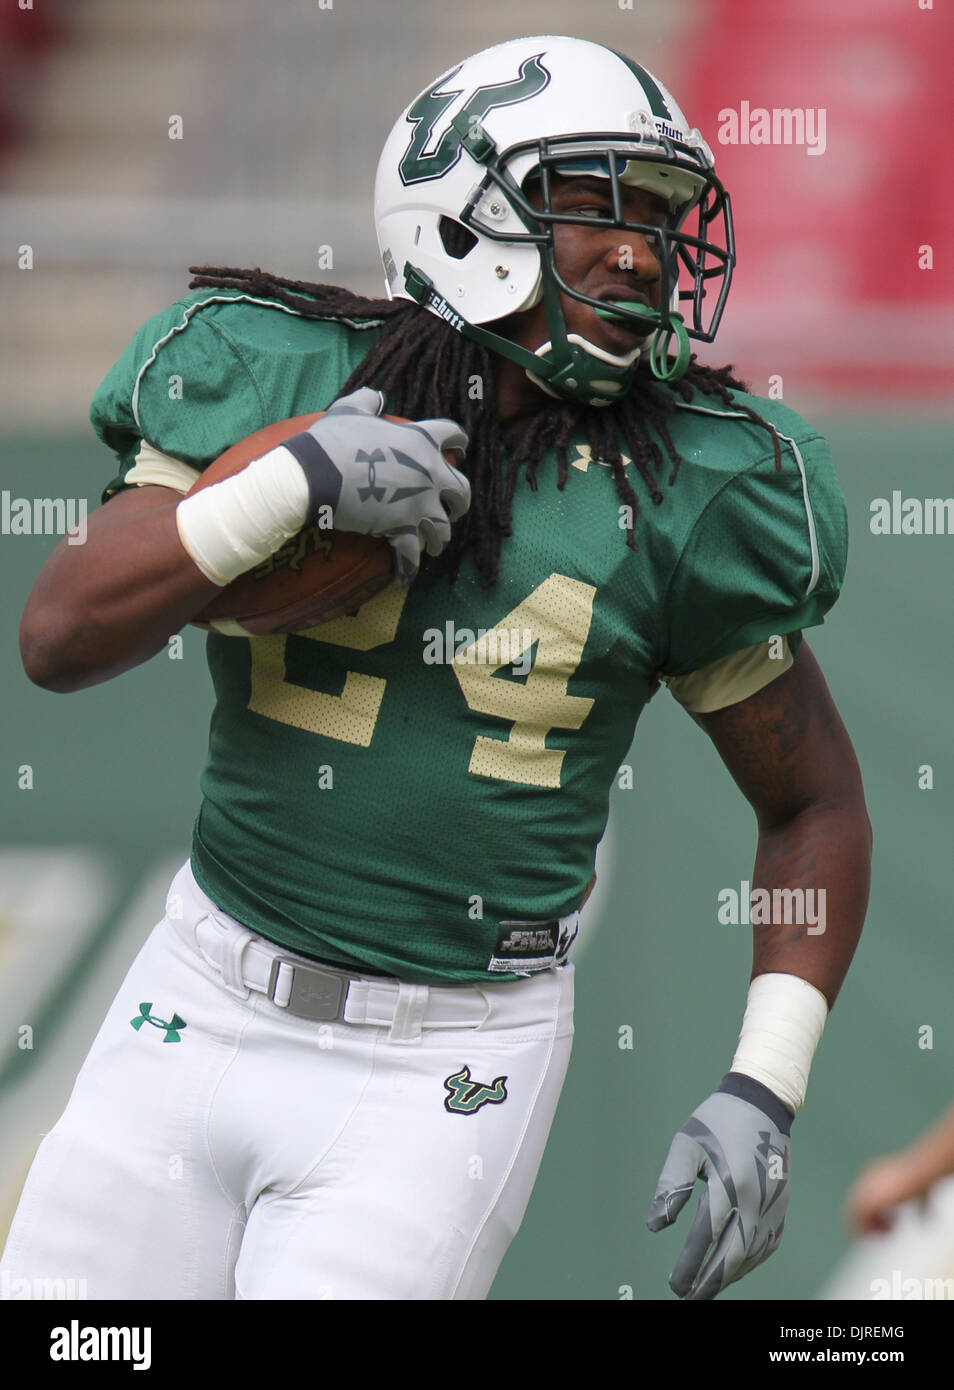 Apr. 17, 2010 - Tampa, Florida, U.S - 17 April 2010: USF running back Bradley Battles (#24) warms up prior to the game. Team South Florida defeated Team Bulls  52-31 as USF played their spring football game at Raymond James Stadium in Tampa, Florida (Credit Image: © Margaret Bowles/Southcreek Global/ZUMApress.com) Stock Photo